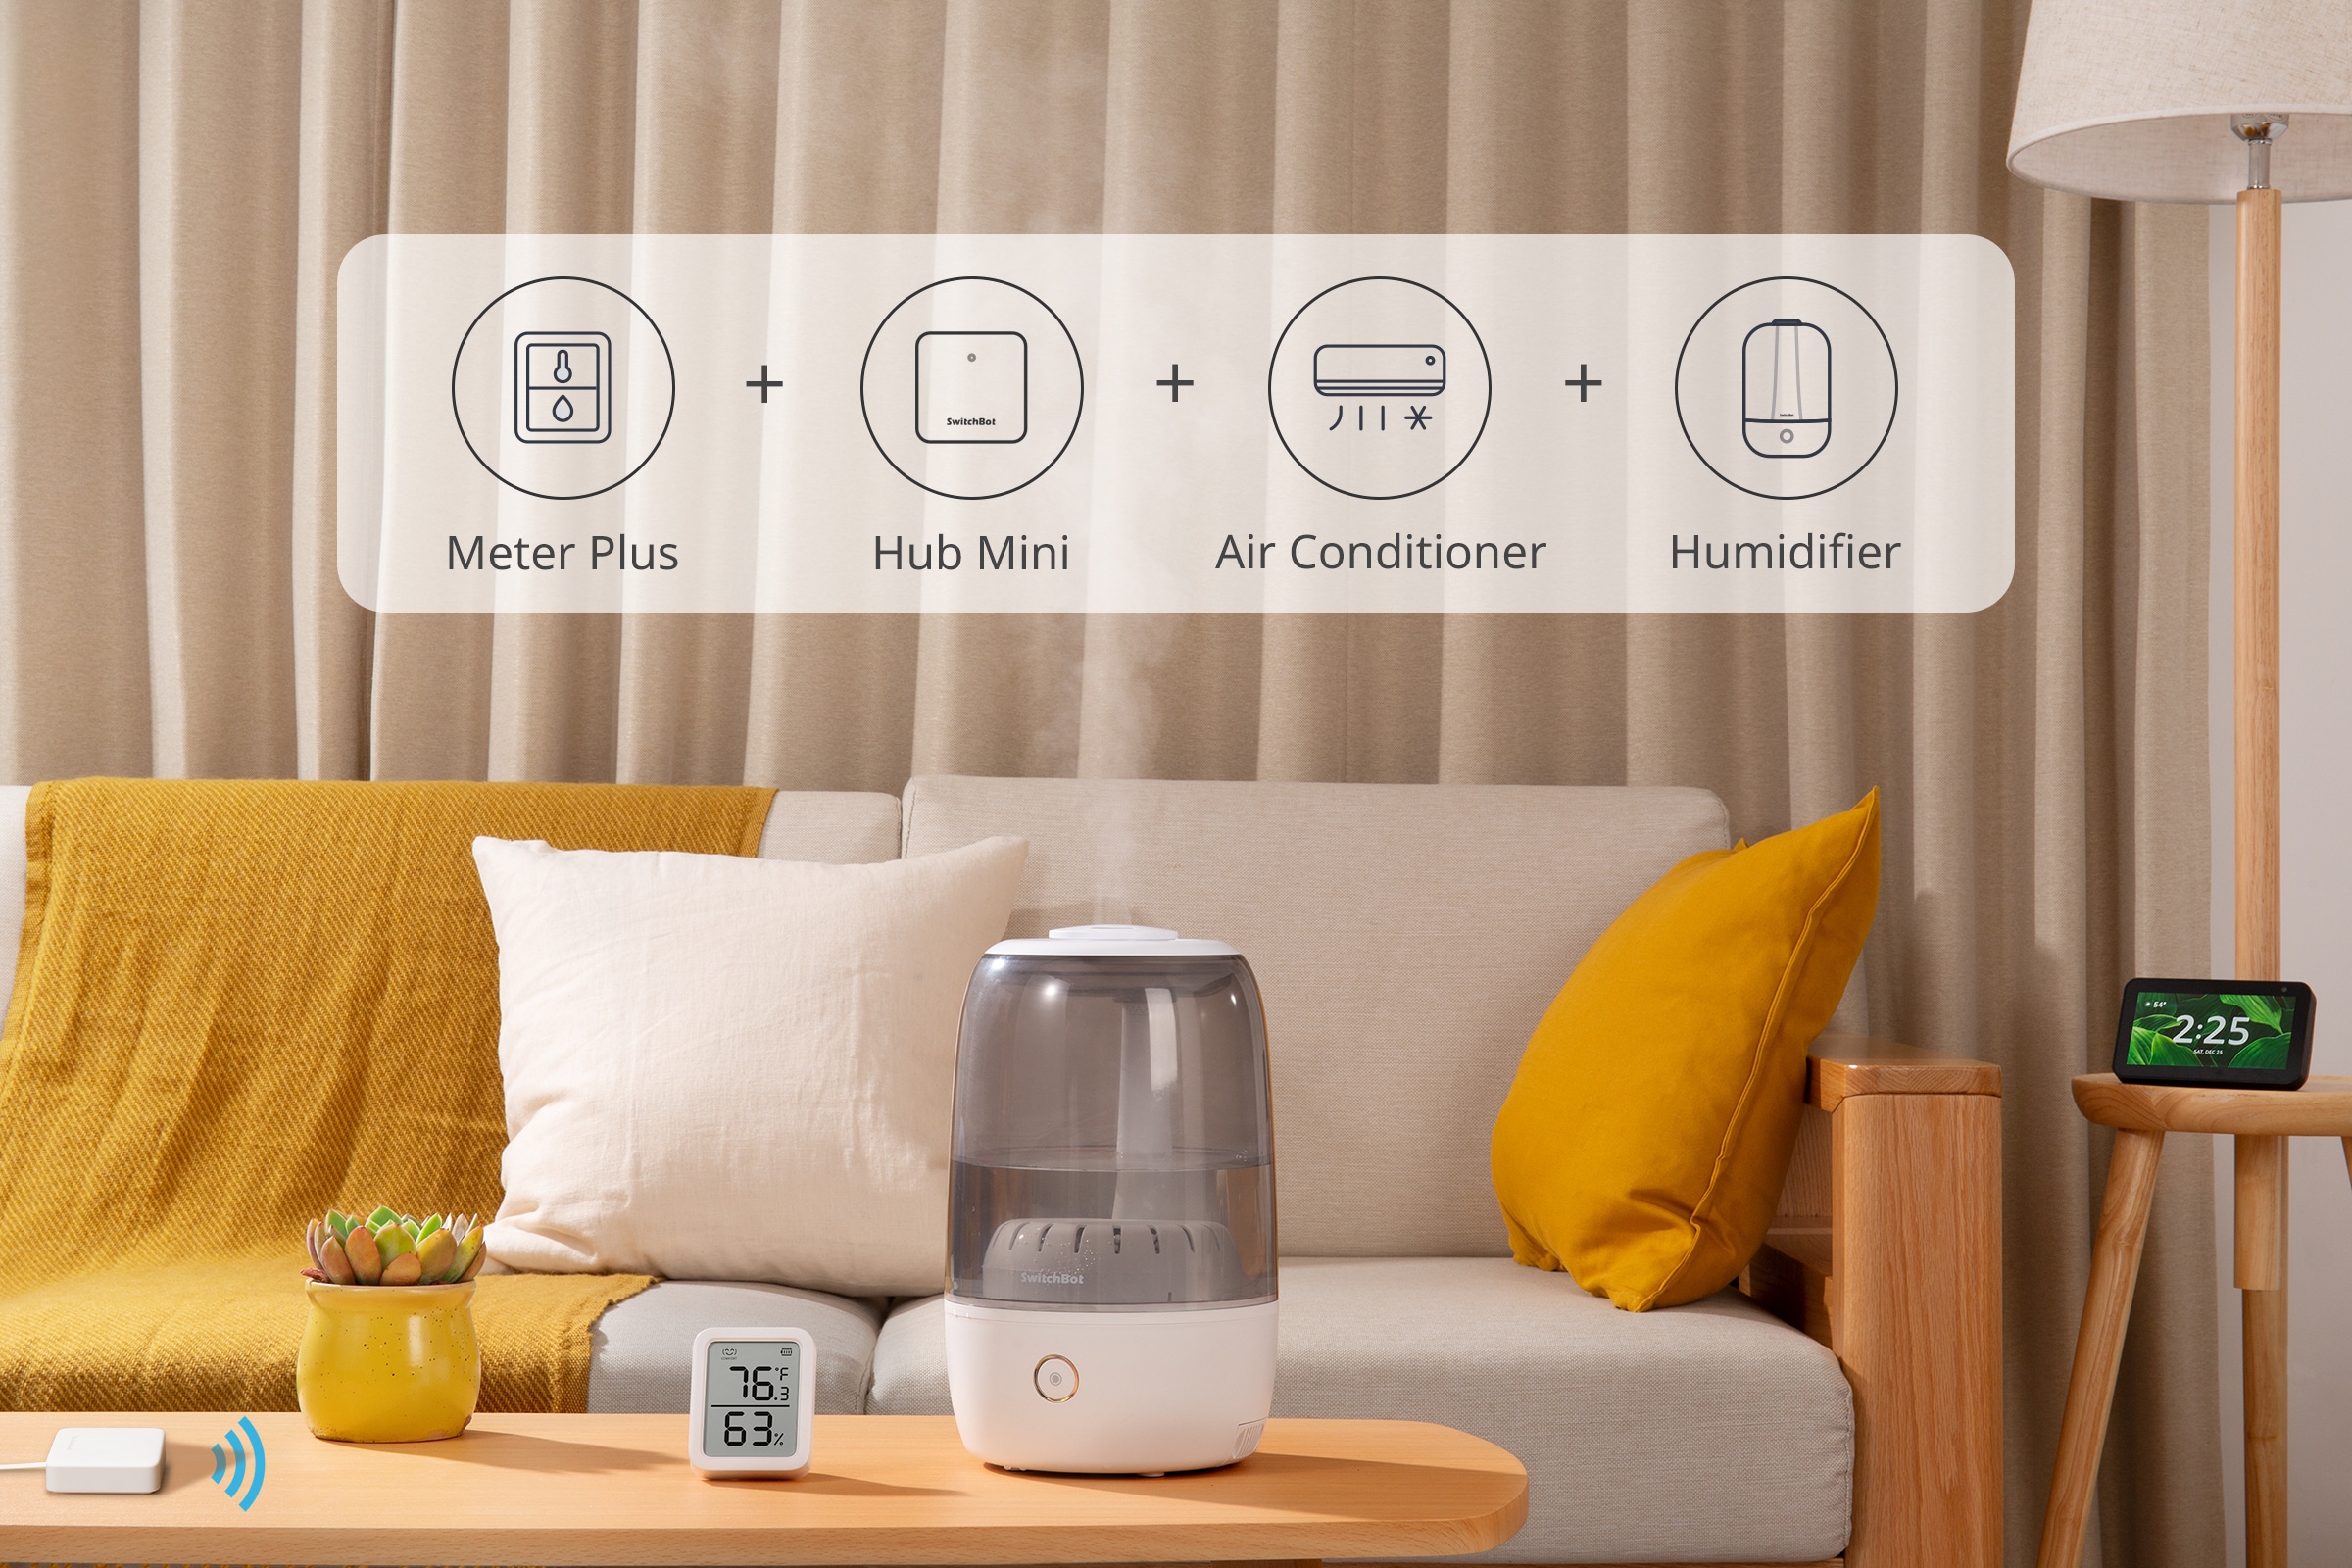 SwitchBot Smart Home Combo Pack: Pan Tilt 2K Indoor Camera, Accurate  Thermometer Hygrometer, Hub Min…See more SwitchBot Smart Home Combo Pack:  Pan